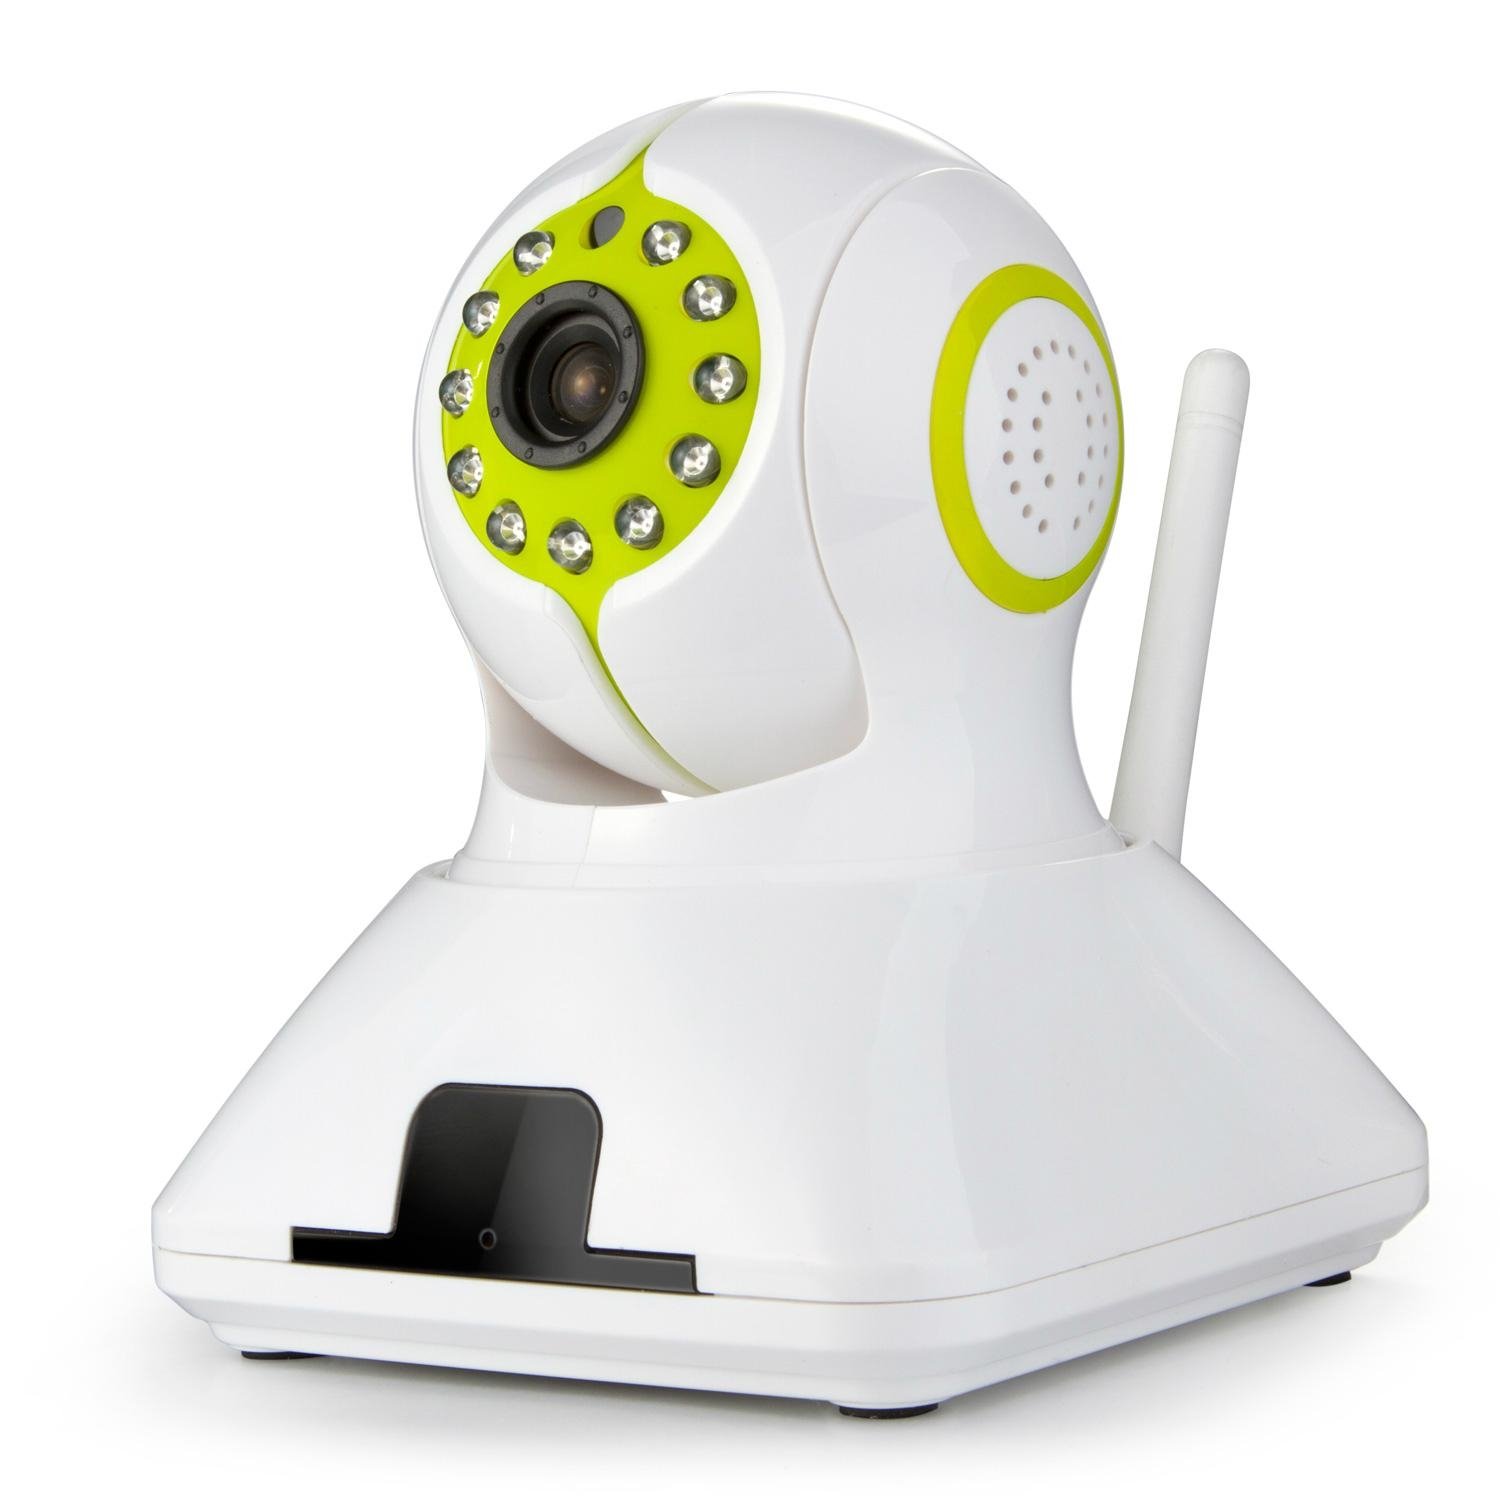 Alytimes Aly011 720p wifi security h.264 hd ip camera onvif 4